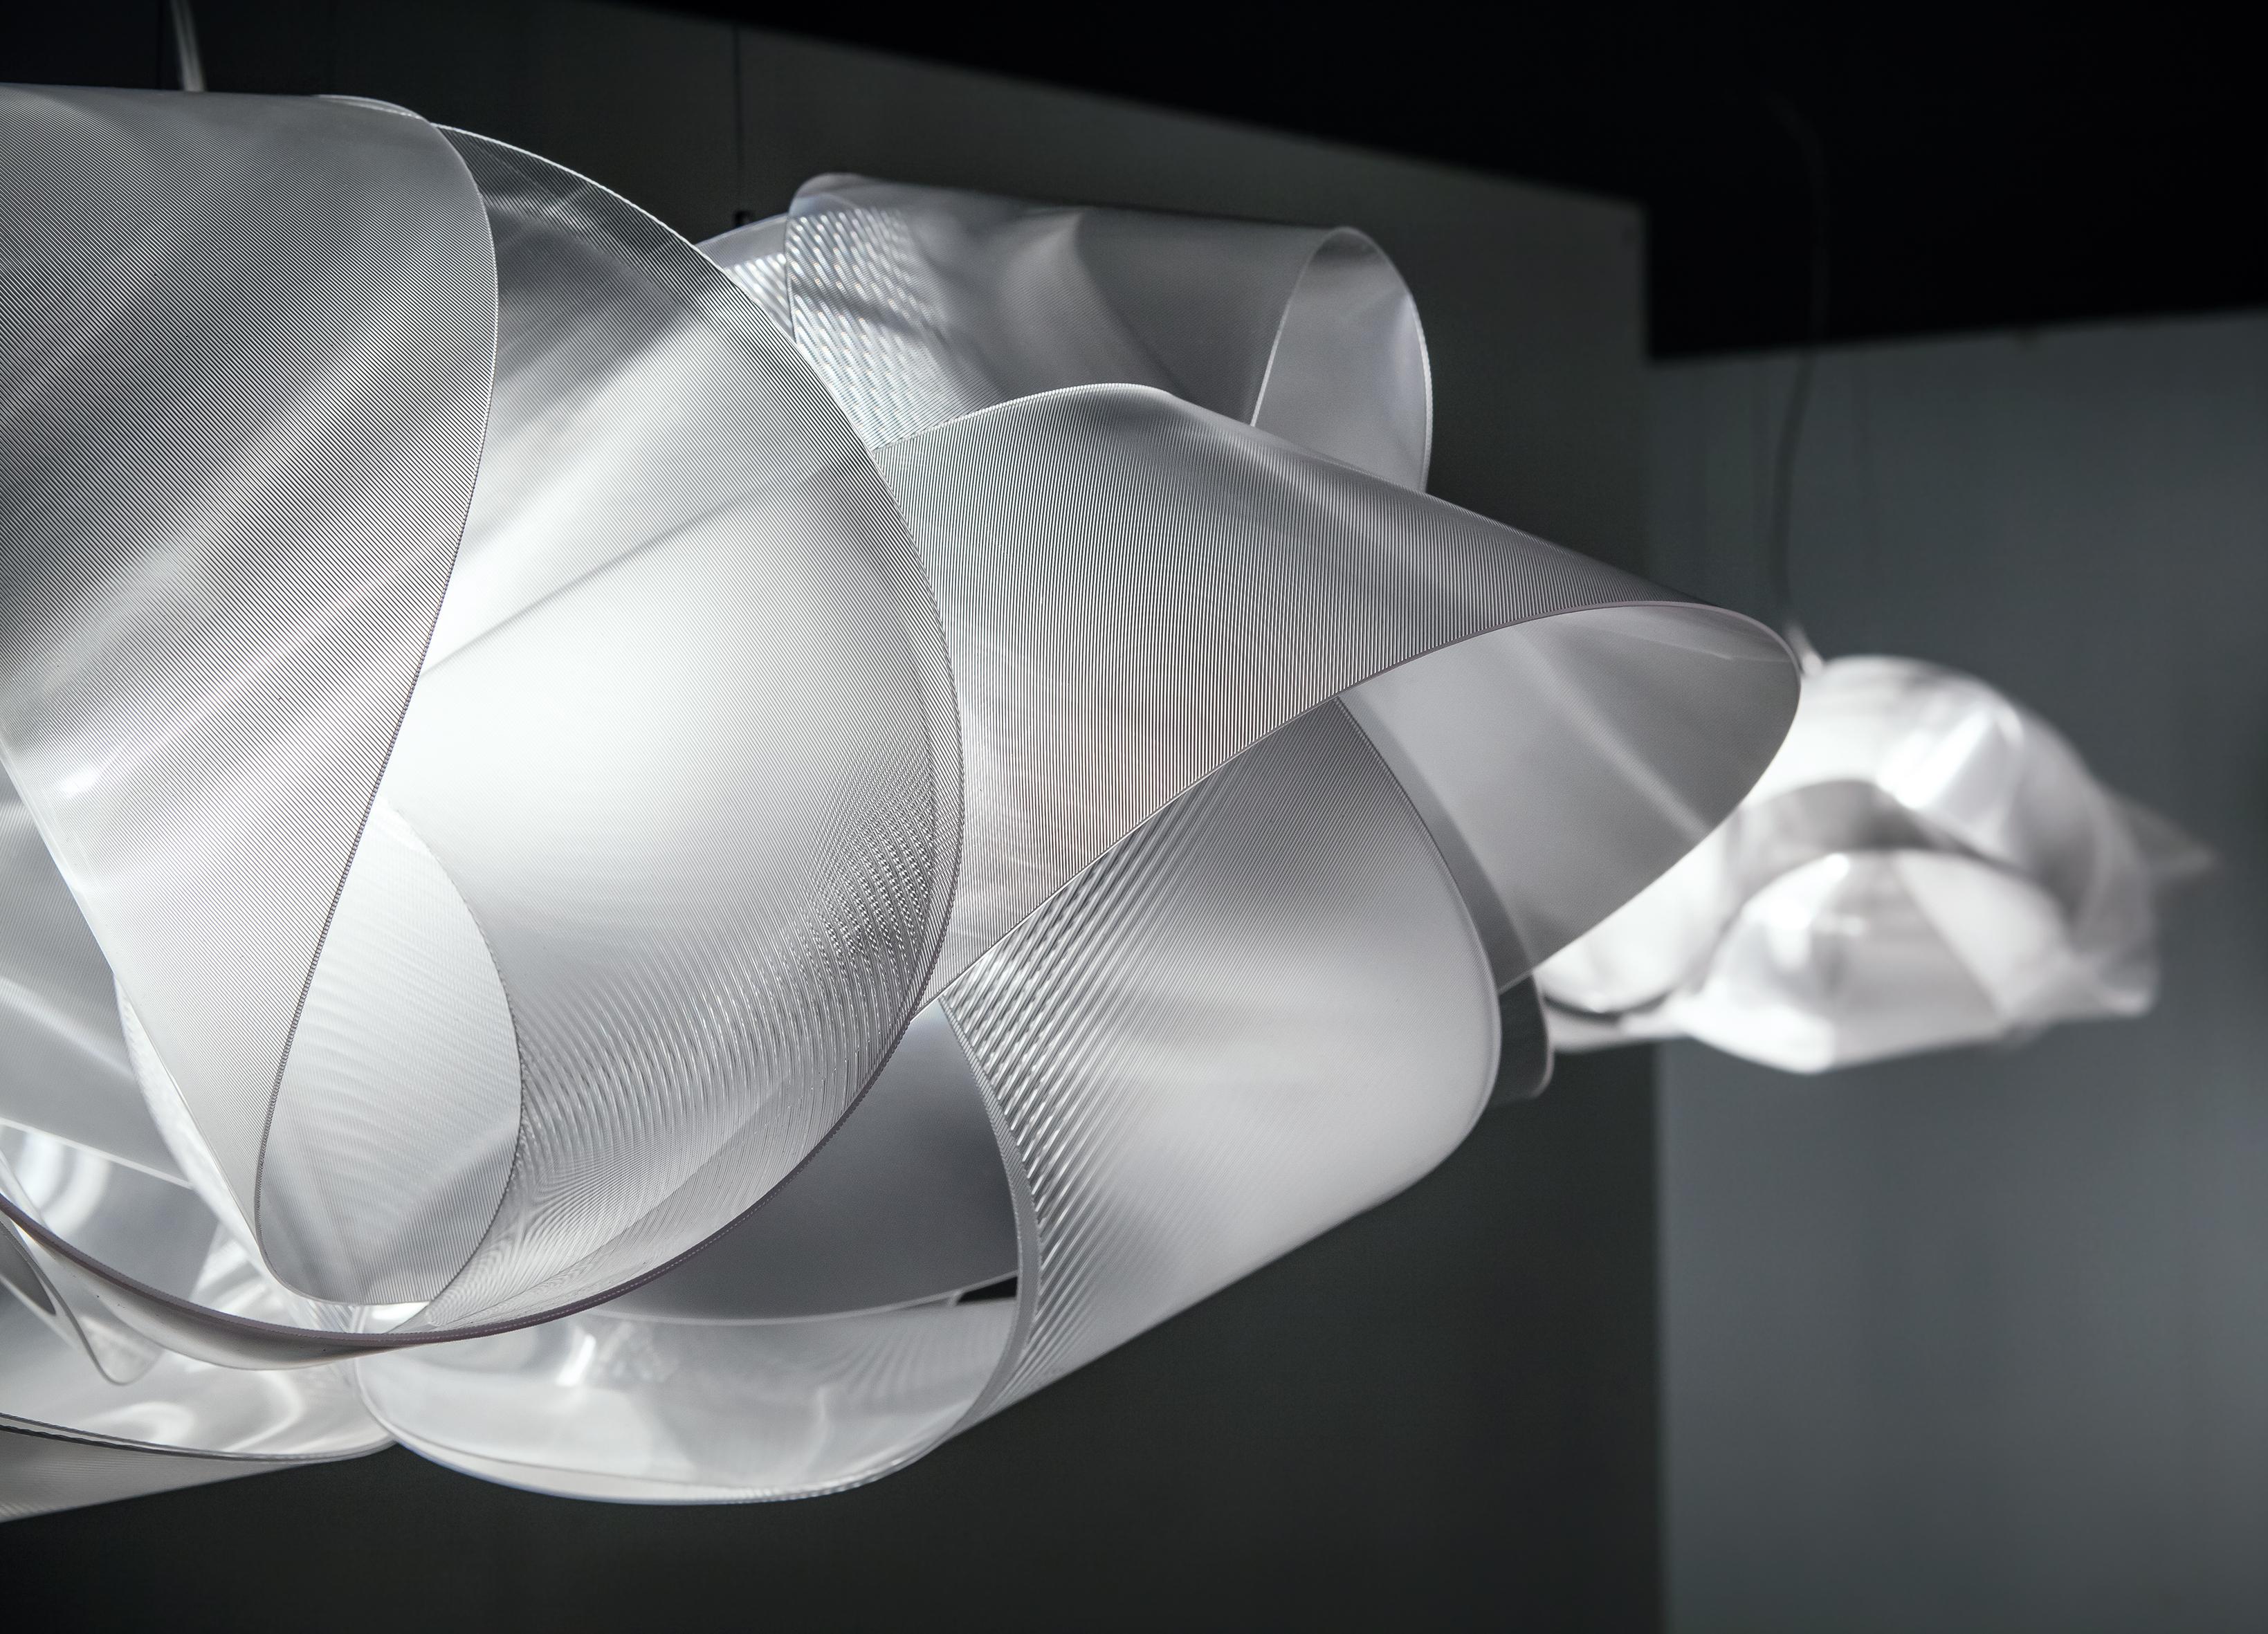 Fabula appears to be a long, silky piece of fabric wound around itself. The new, iridescent versions for ceiling and wall are 60 cm in diameter, handmade with Lentiflex®, and feature 5 light sources that make it perfect for illuminating large